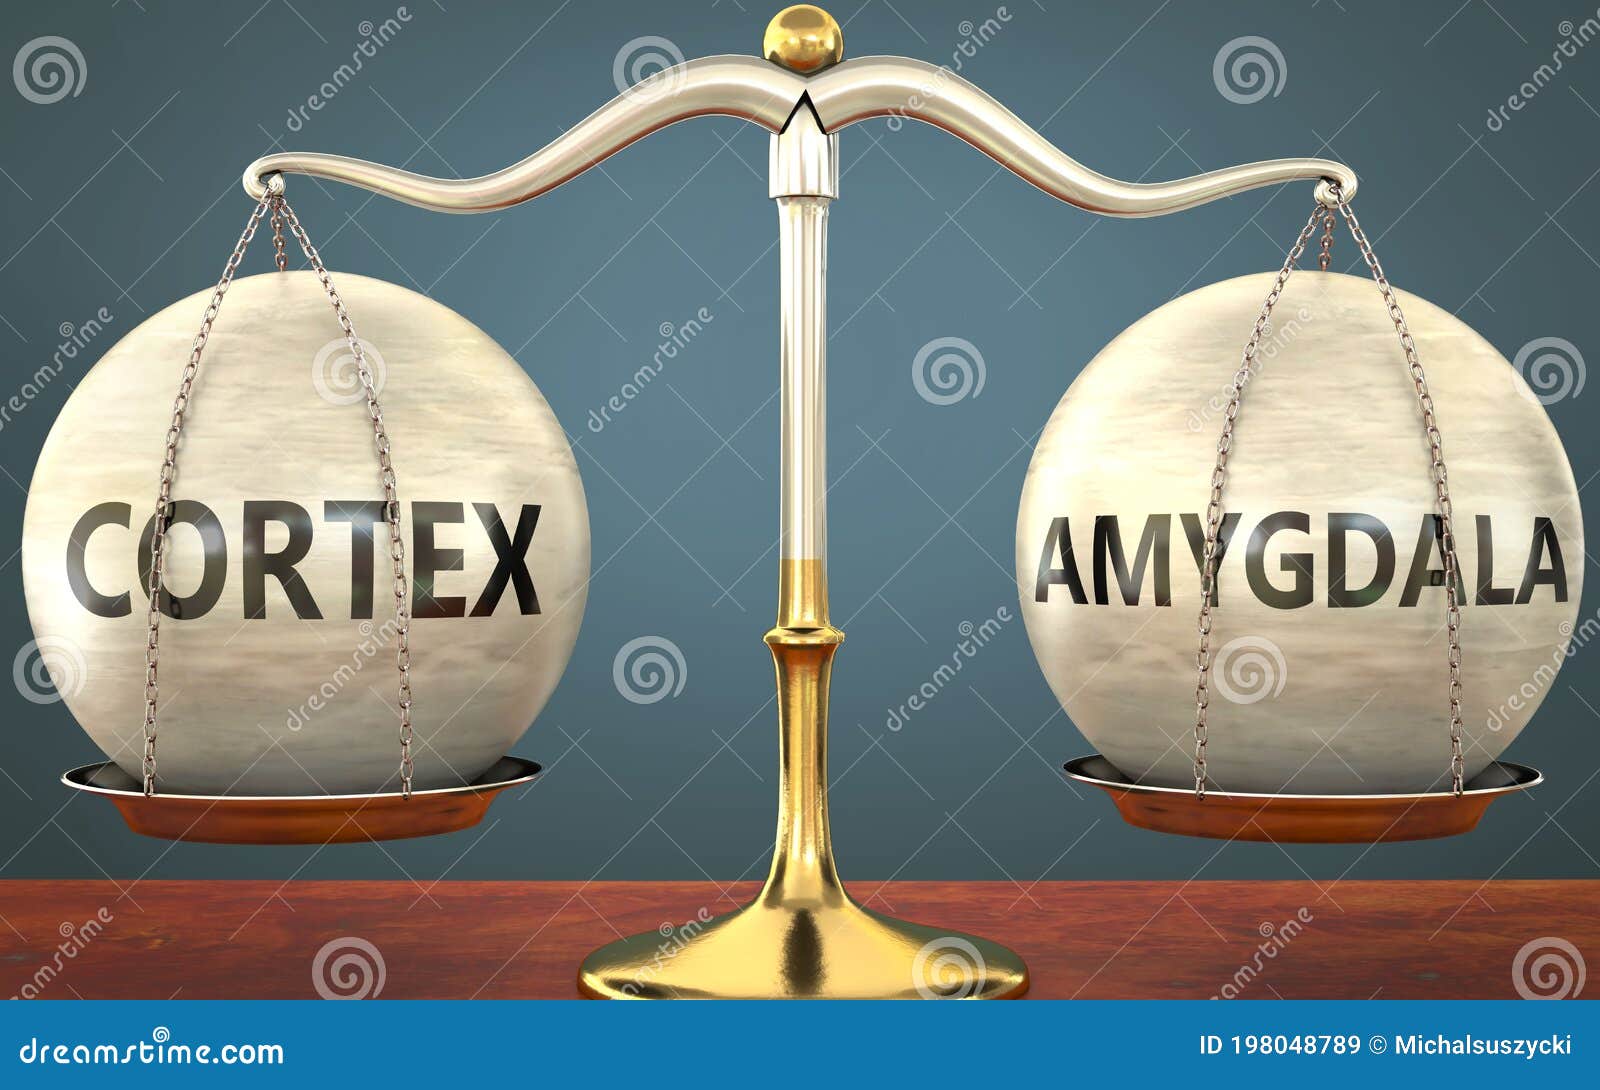 cortex and amygdala staying in balance - pictured as a metal scale with weights and labels cortex and amygdala to ize